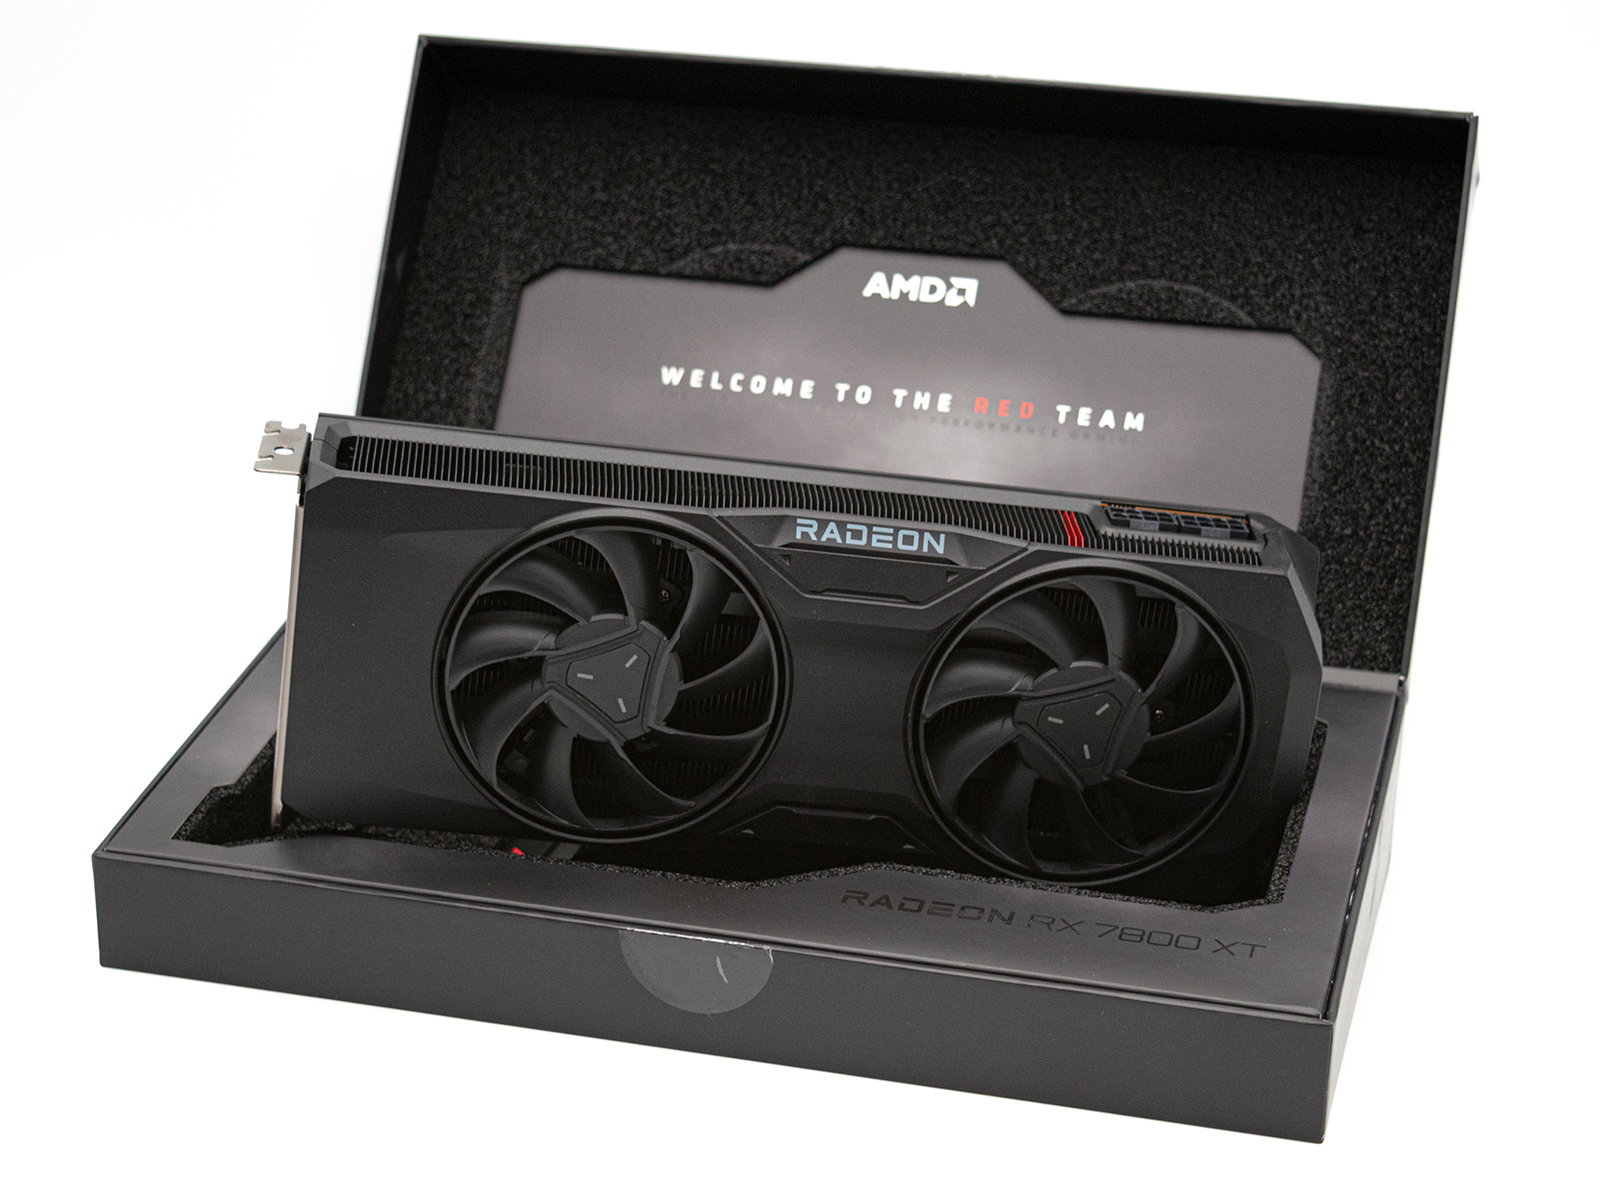 AMD Radeon RX 7800 XT Desktop graphics card in our test: Nvidia's